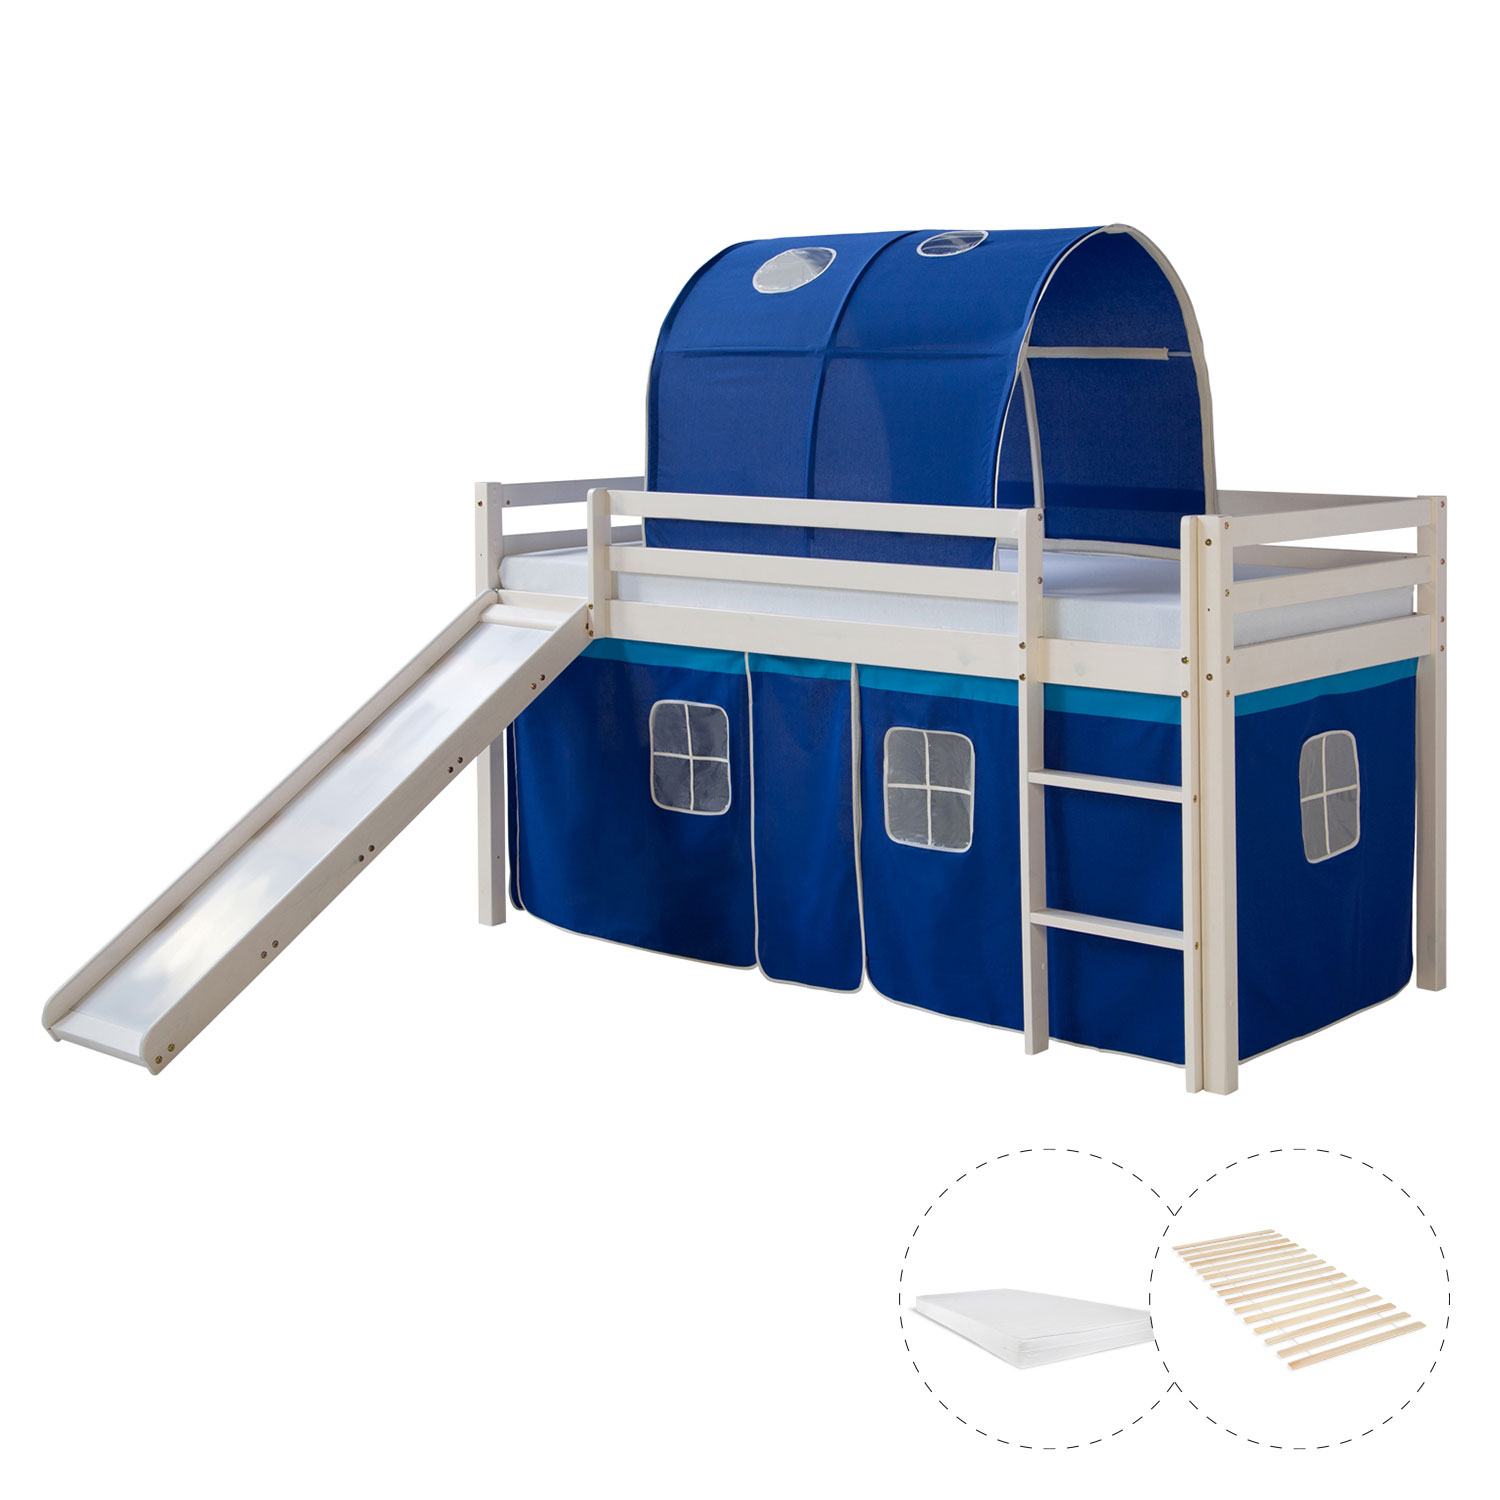 Loftbed with Mattress 90x200 cm Slide Bunk bed Childrens bed Solid Pine Wood Curtain Tunnel Blue Slatts